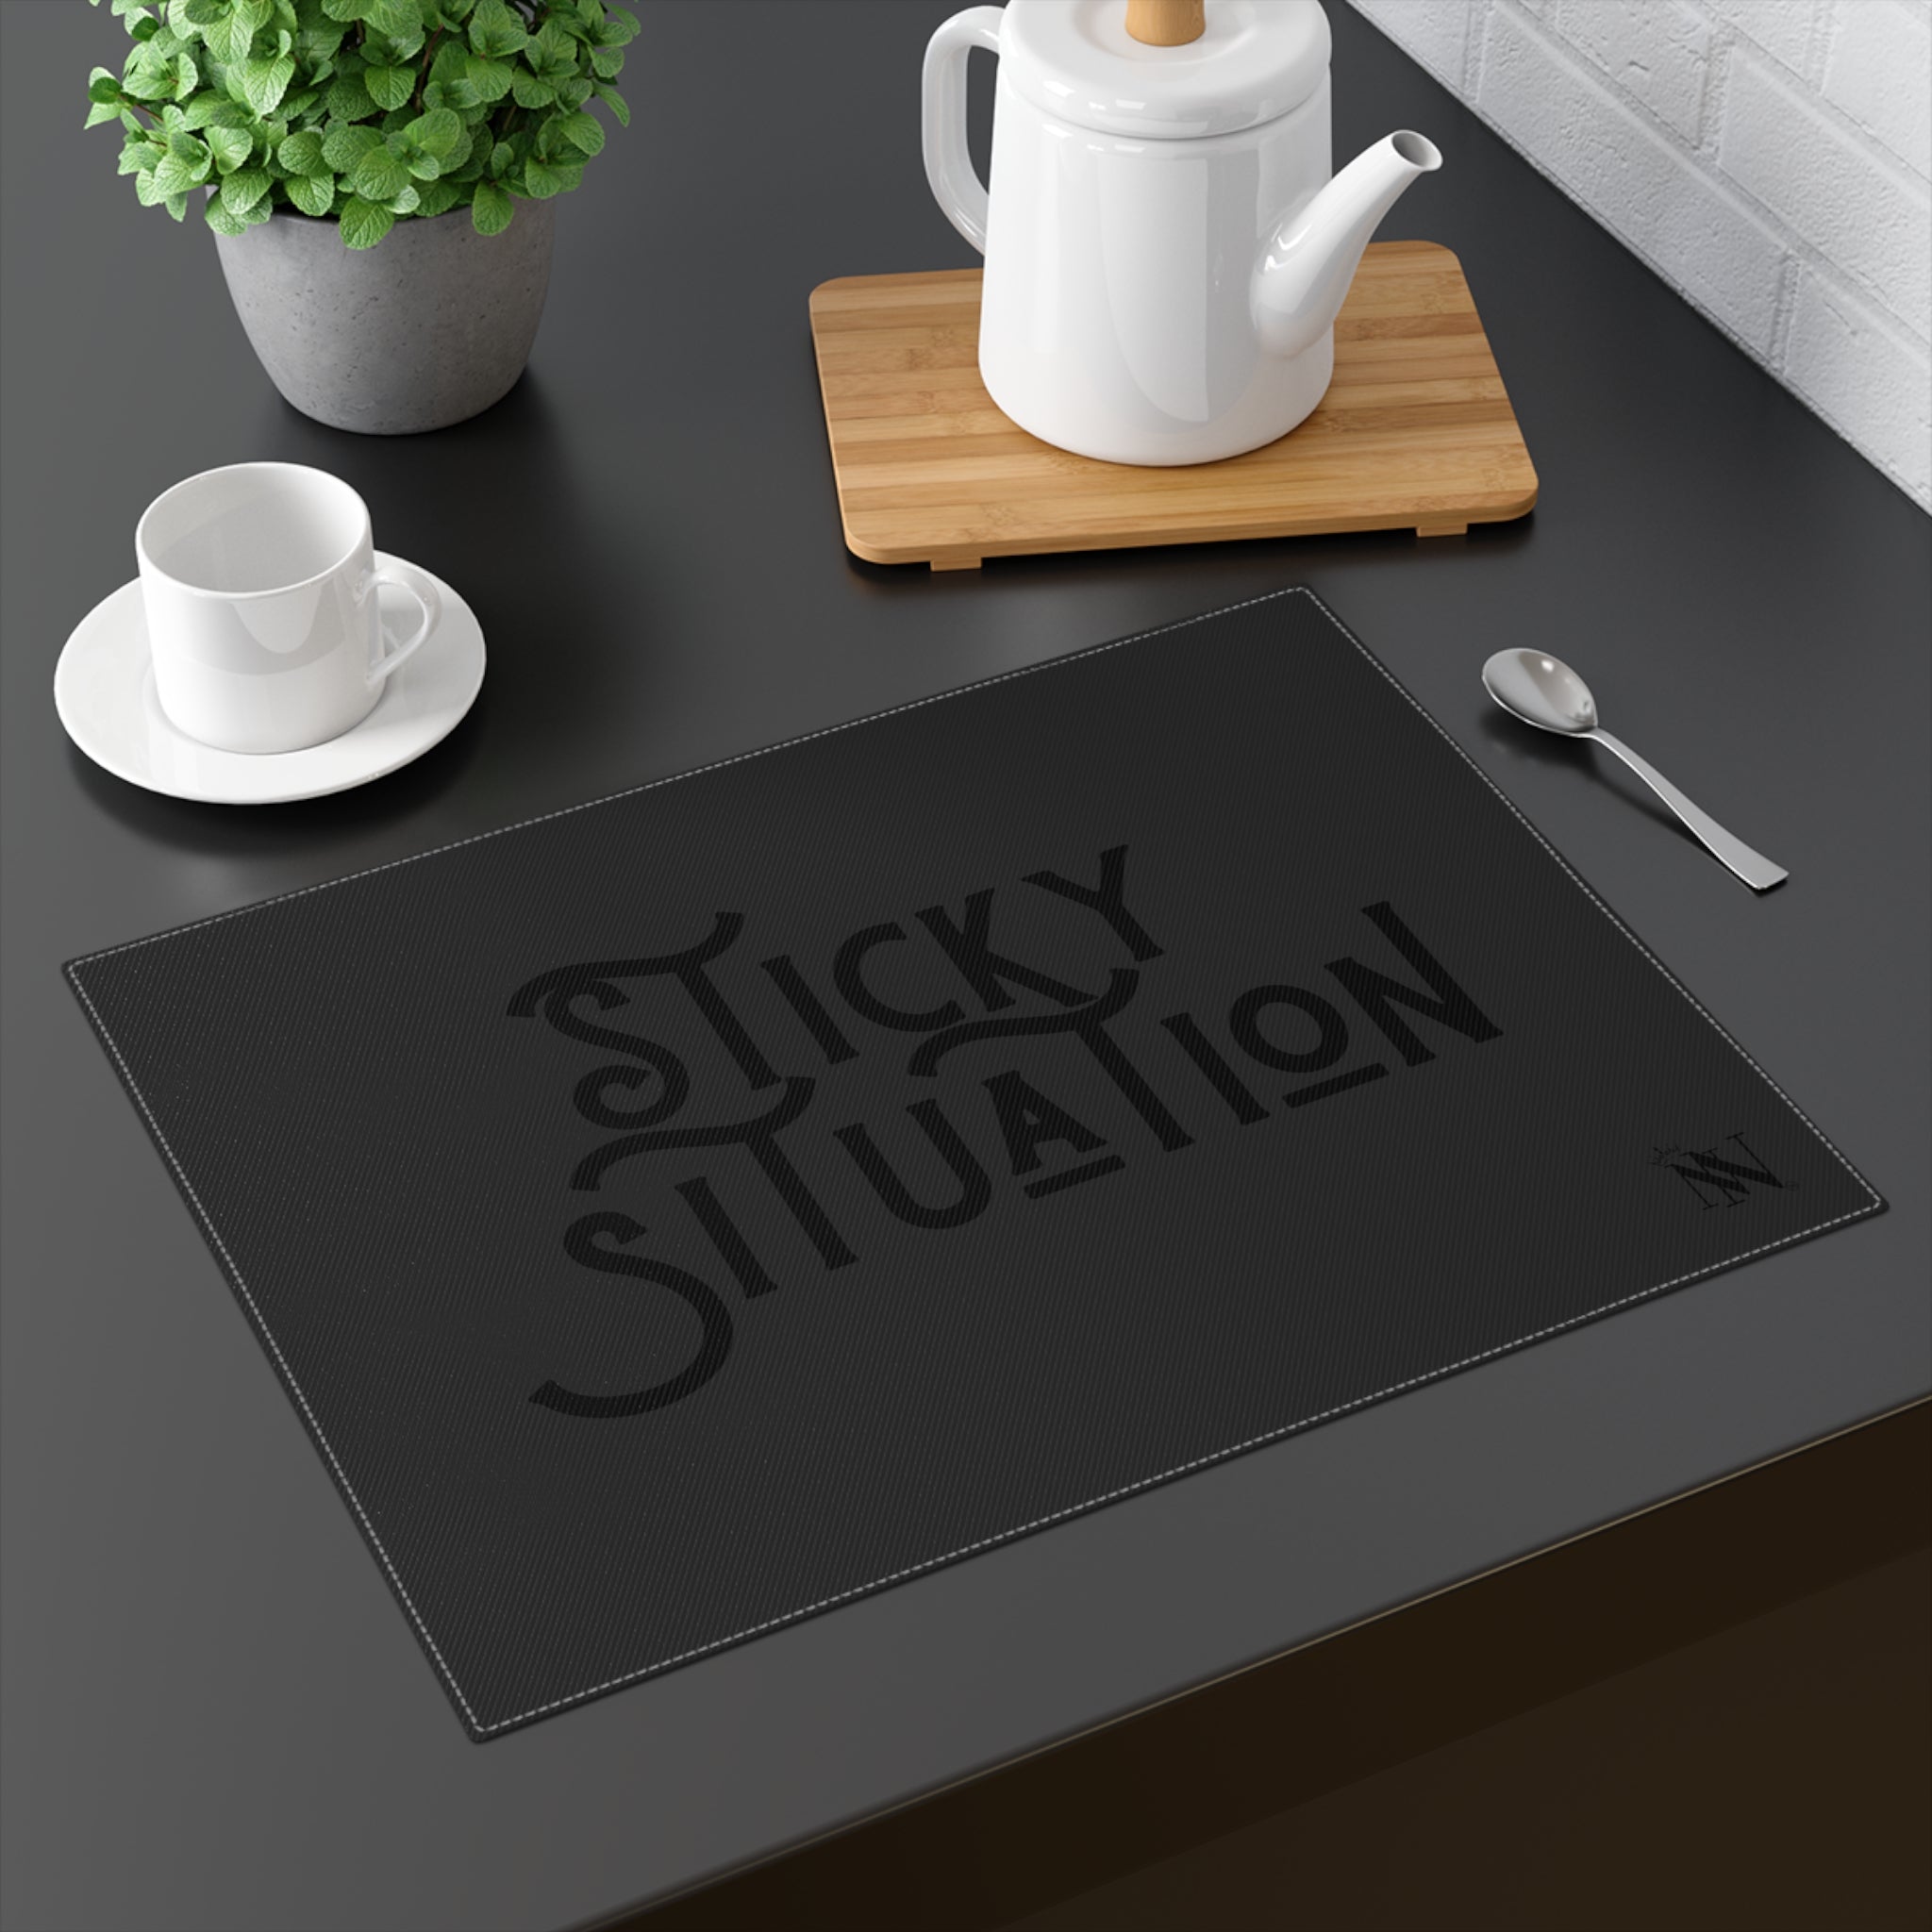 Sticky situation sex toys mat